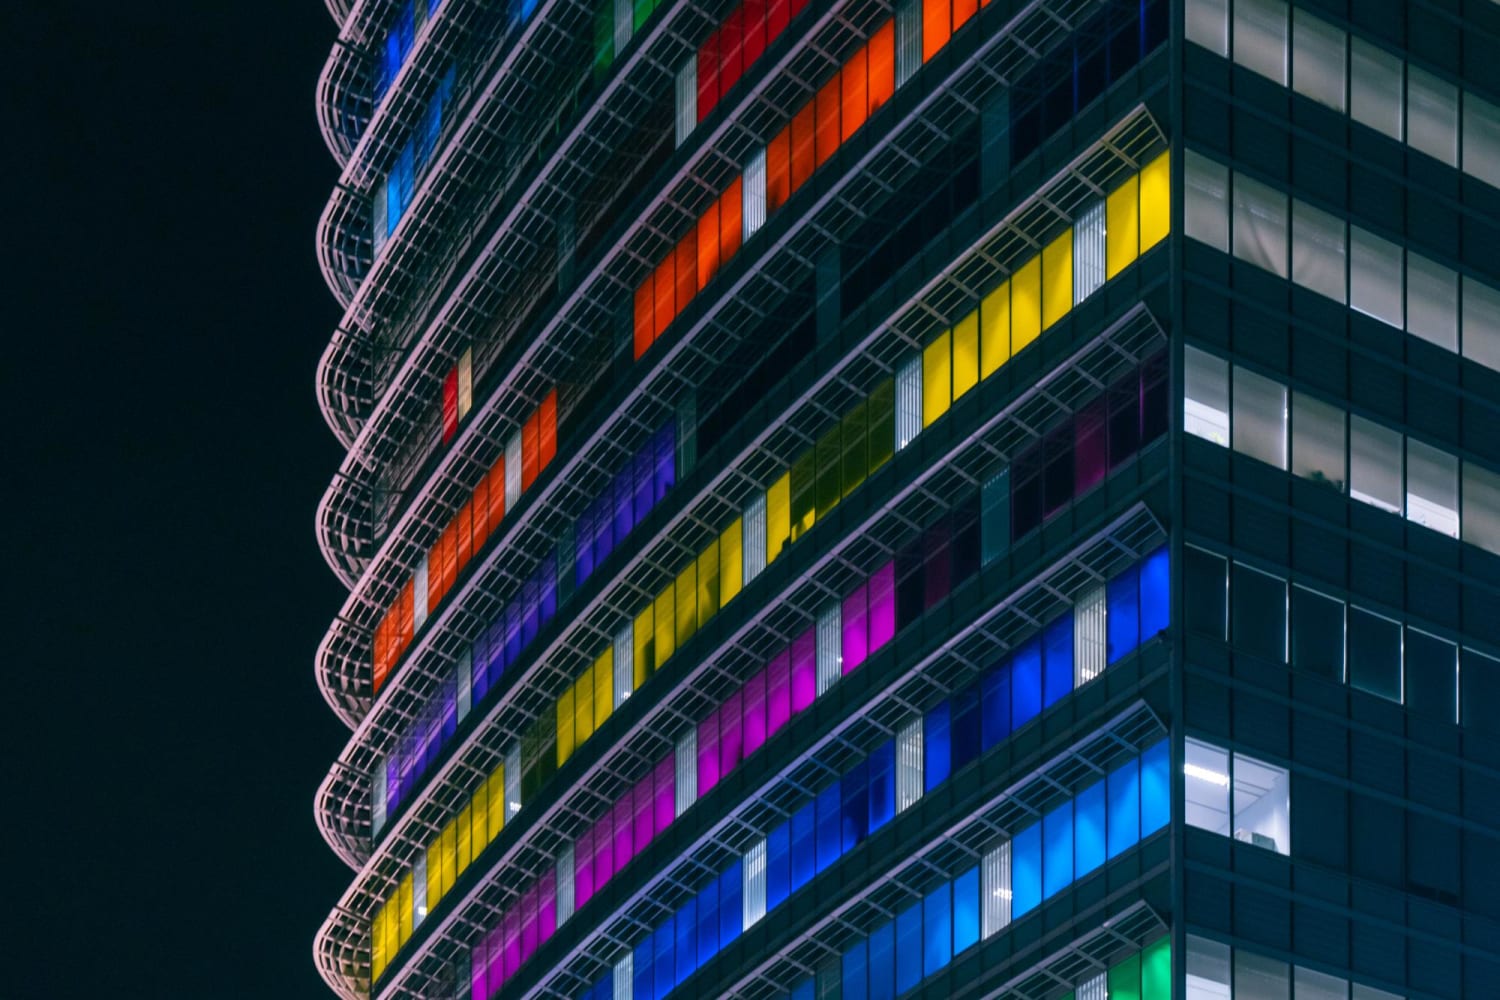 Colourful building in South Korea.